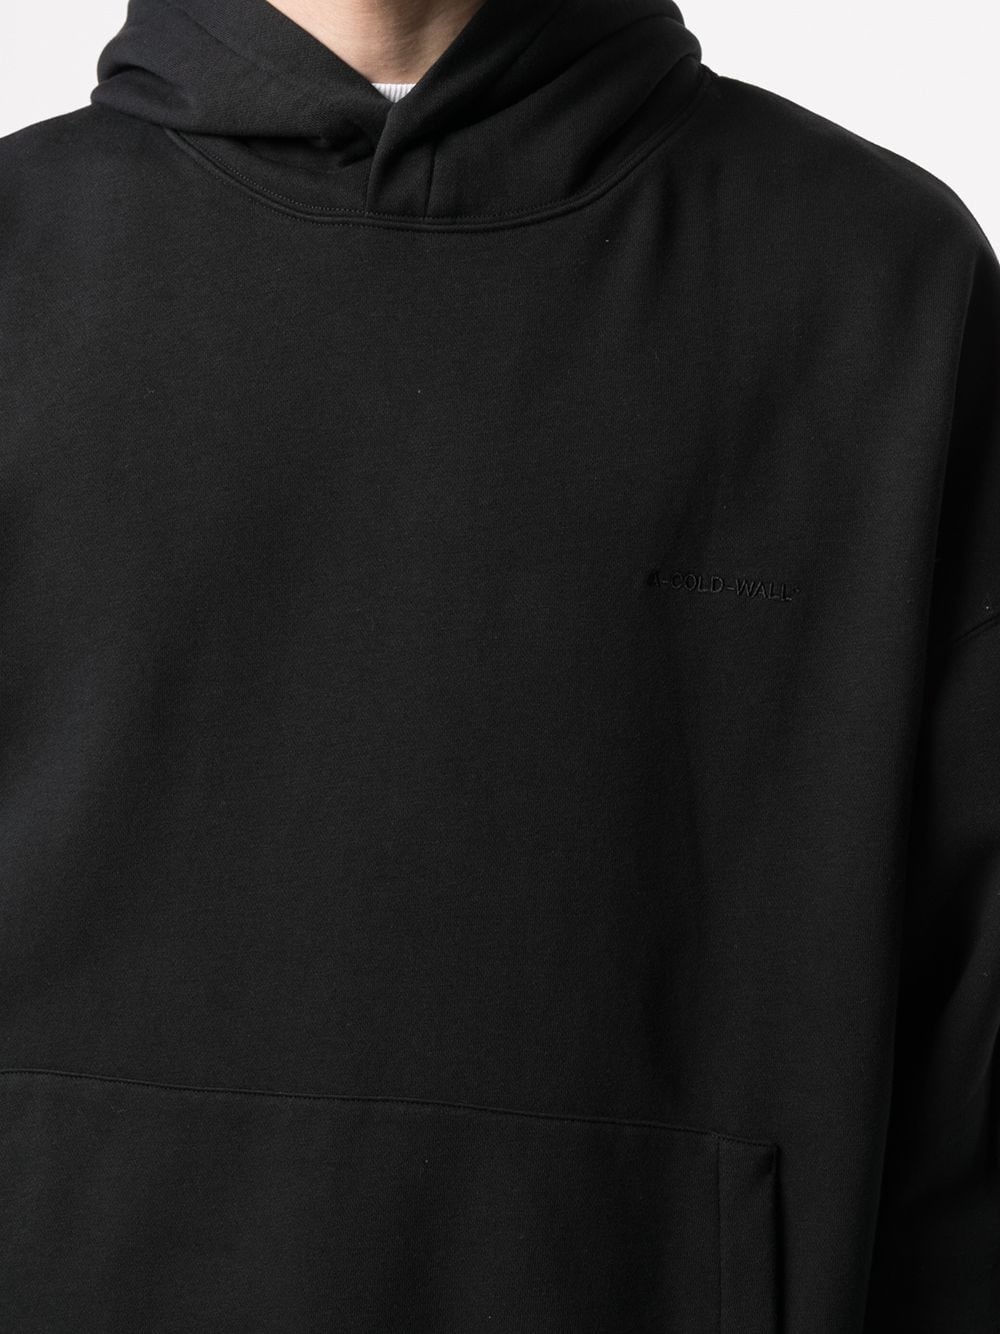 A-COLD-WALL* Dissection pullover hoodie | REVERSIBLE